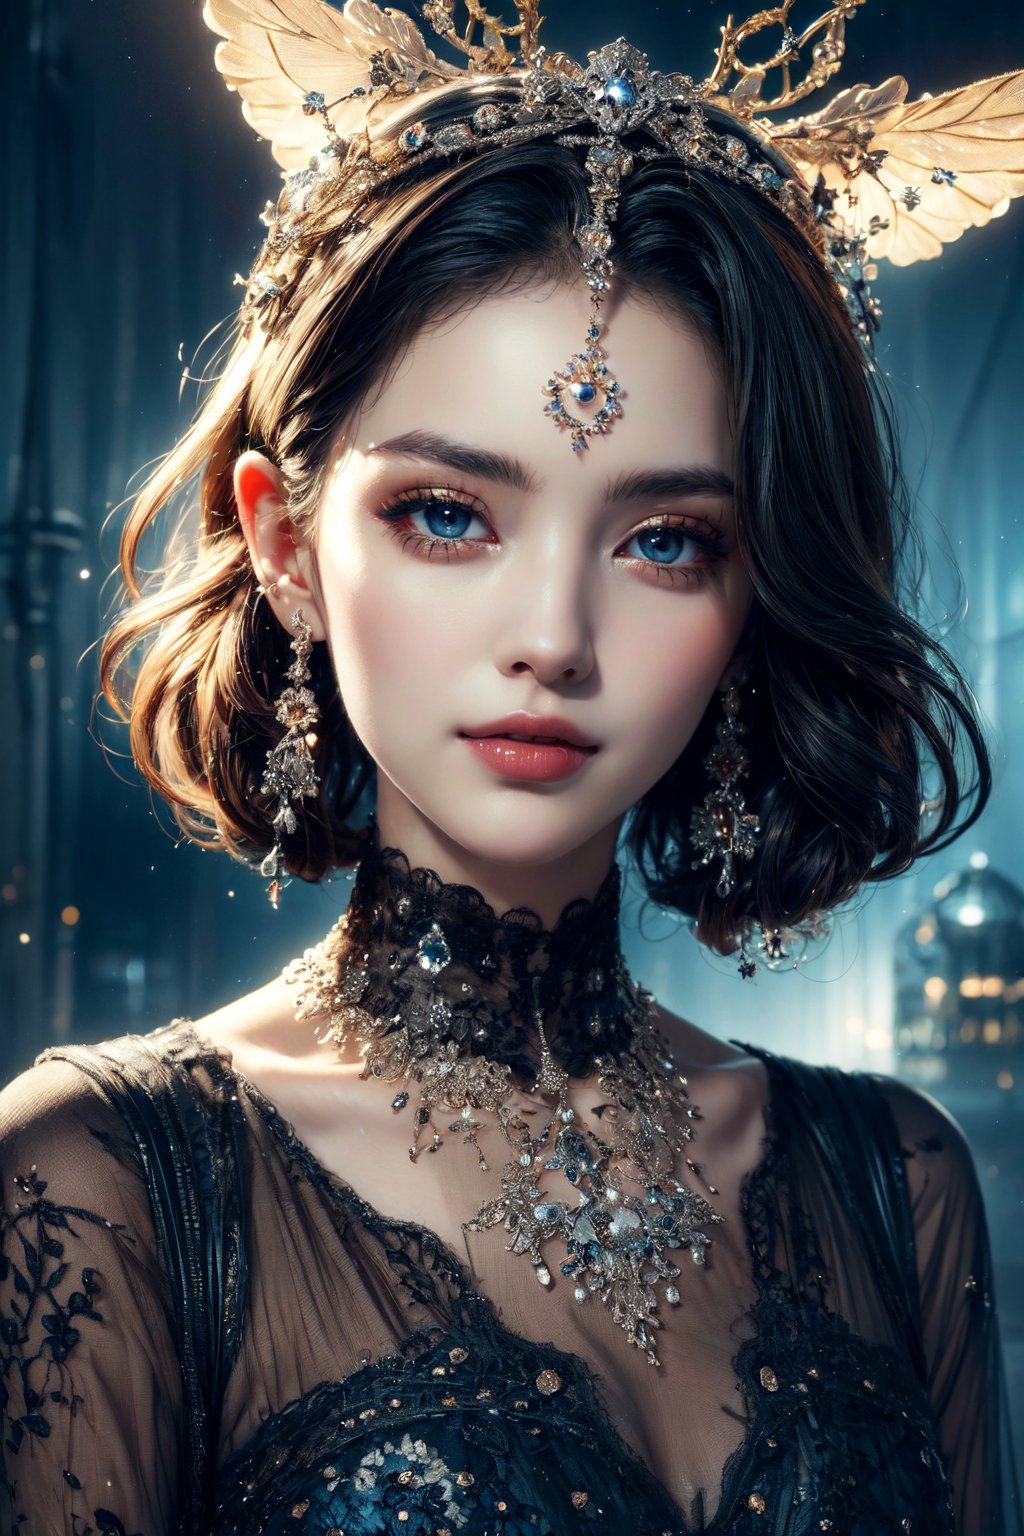 (masterpiece, high quality:1.5), 8K, HDR, 
1girl, well_defined_face, well_defined_eyes, ultra_detailed_eyes, ultra_detailed_face, by FuturEvoLab, 
ethereal lighting, immortal, elegant, porcelain skin, jet-black hair, waves, pale face, ice-blue eyes, blood-red lips, pinhole photograph, retro aesthetic, monochromatic backdrop, mysterious, enigmatic, timeless allure, the siren of the night, secrets, longing, hidden dangers, captivating, nostalgia, timeless fascination, Edge feathering and holy light, Exquisite face, Exquisite face, Exquisite face